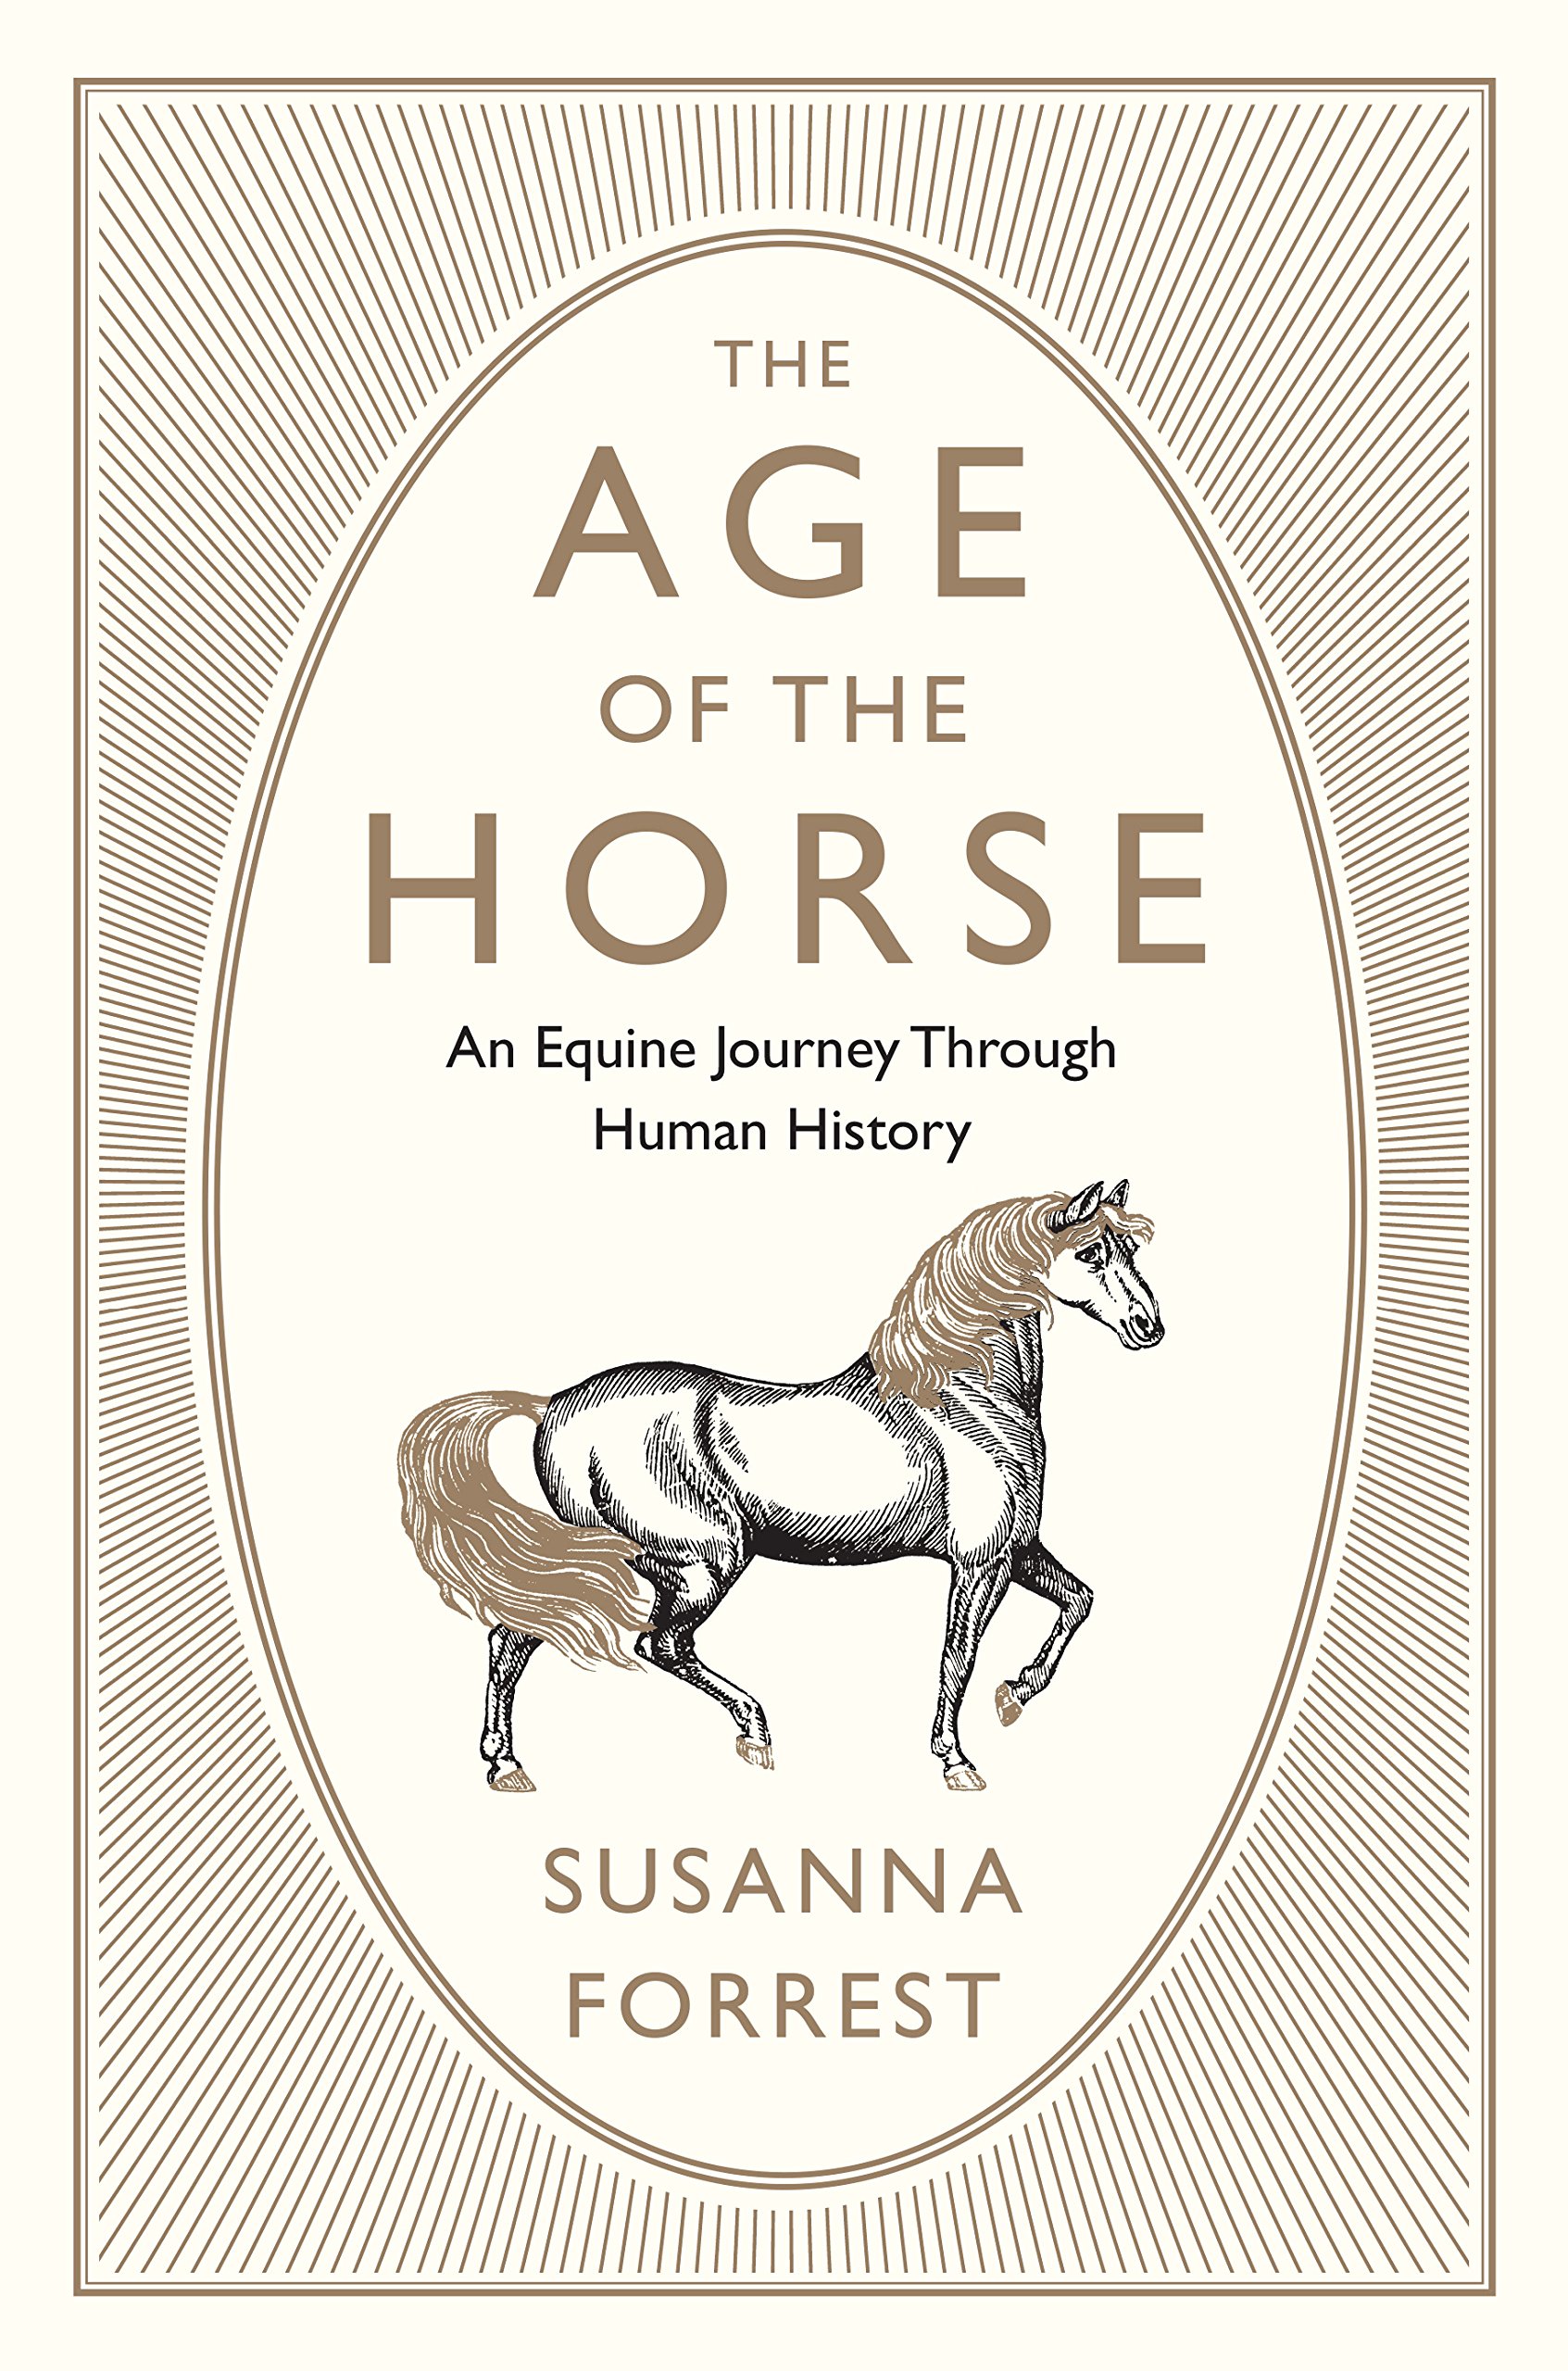 What is the age of a horse in human years